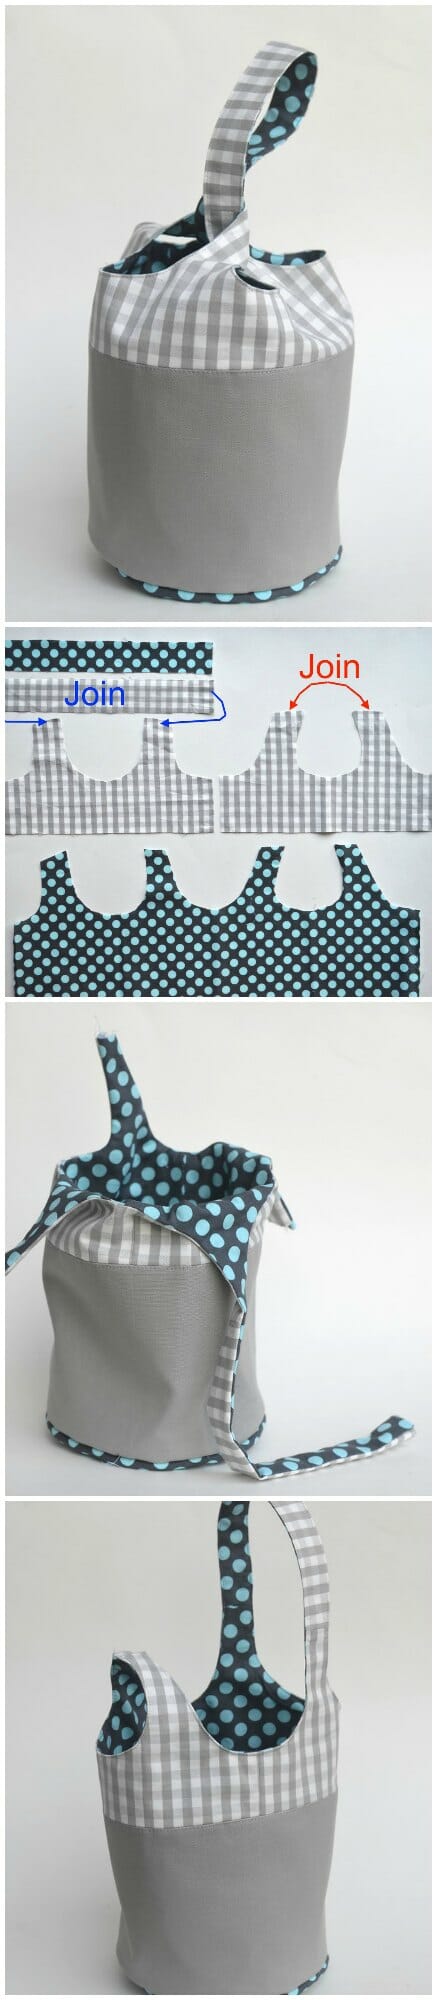 Free sewing pattern and full photo tutorial for this fully-reversible bucket tote bag.  I'm making some in nursery fabrics as baby shower gifts - handy and they hang up too.